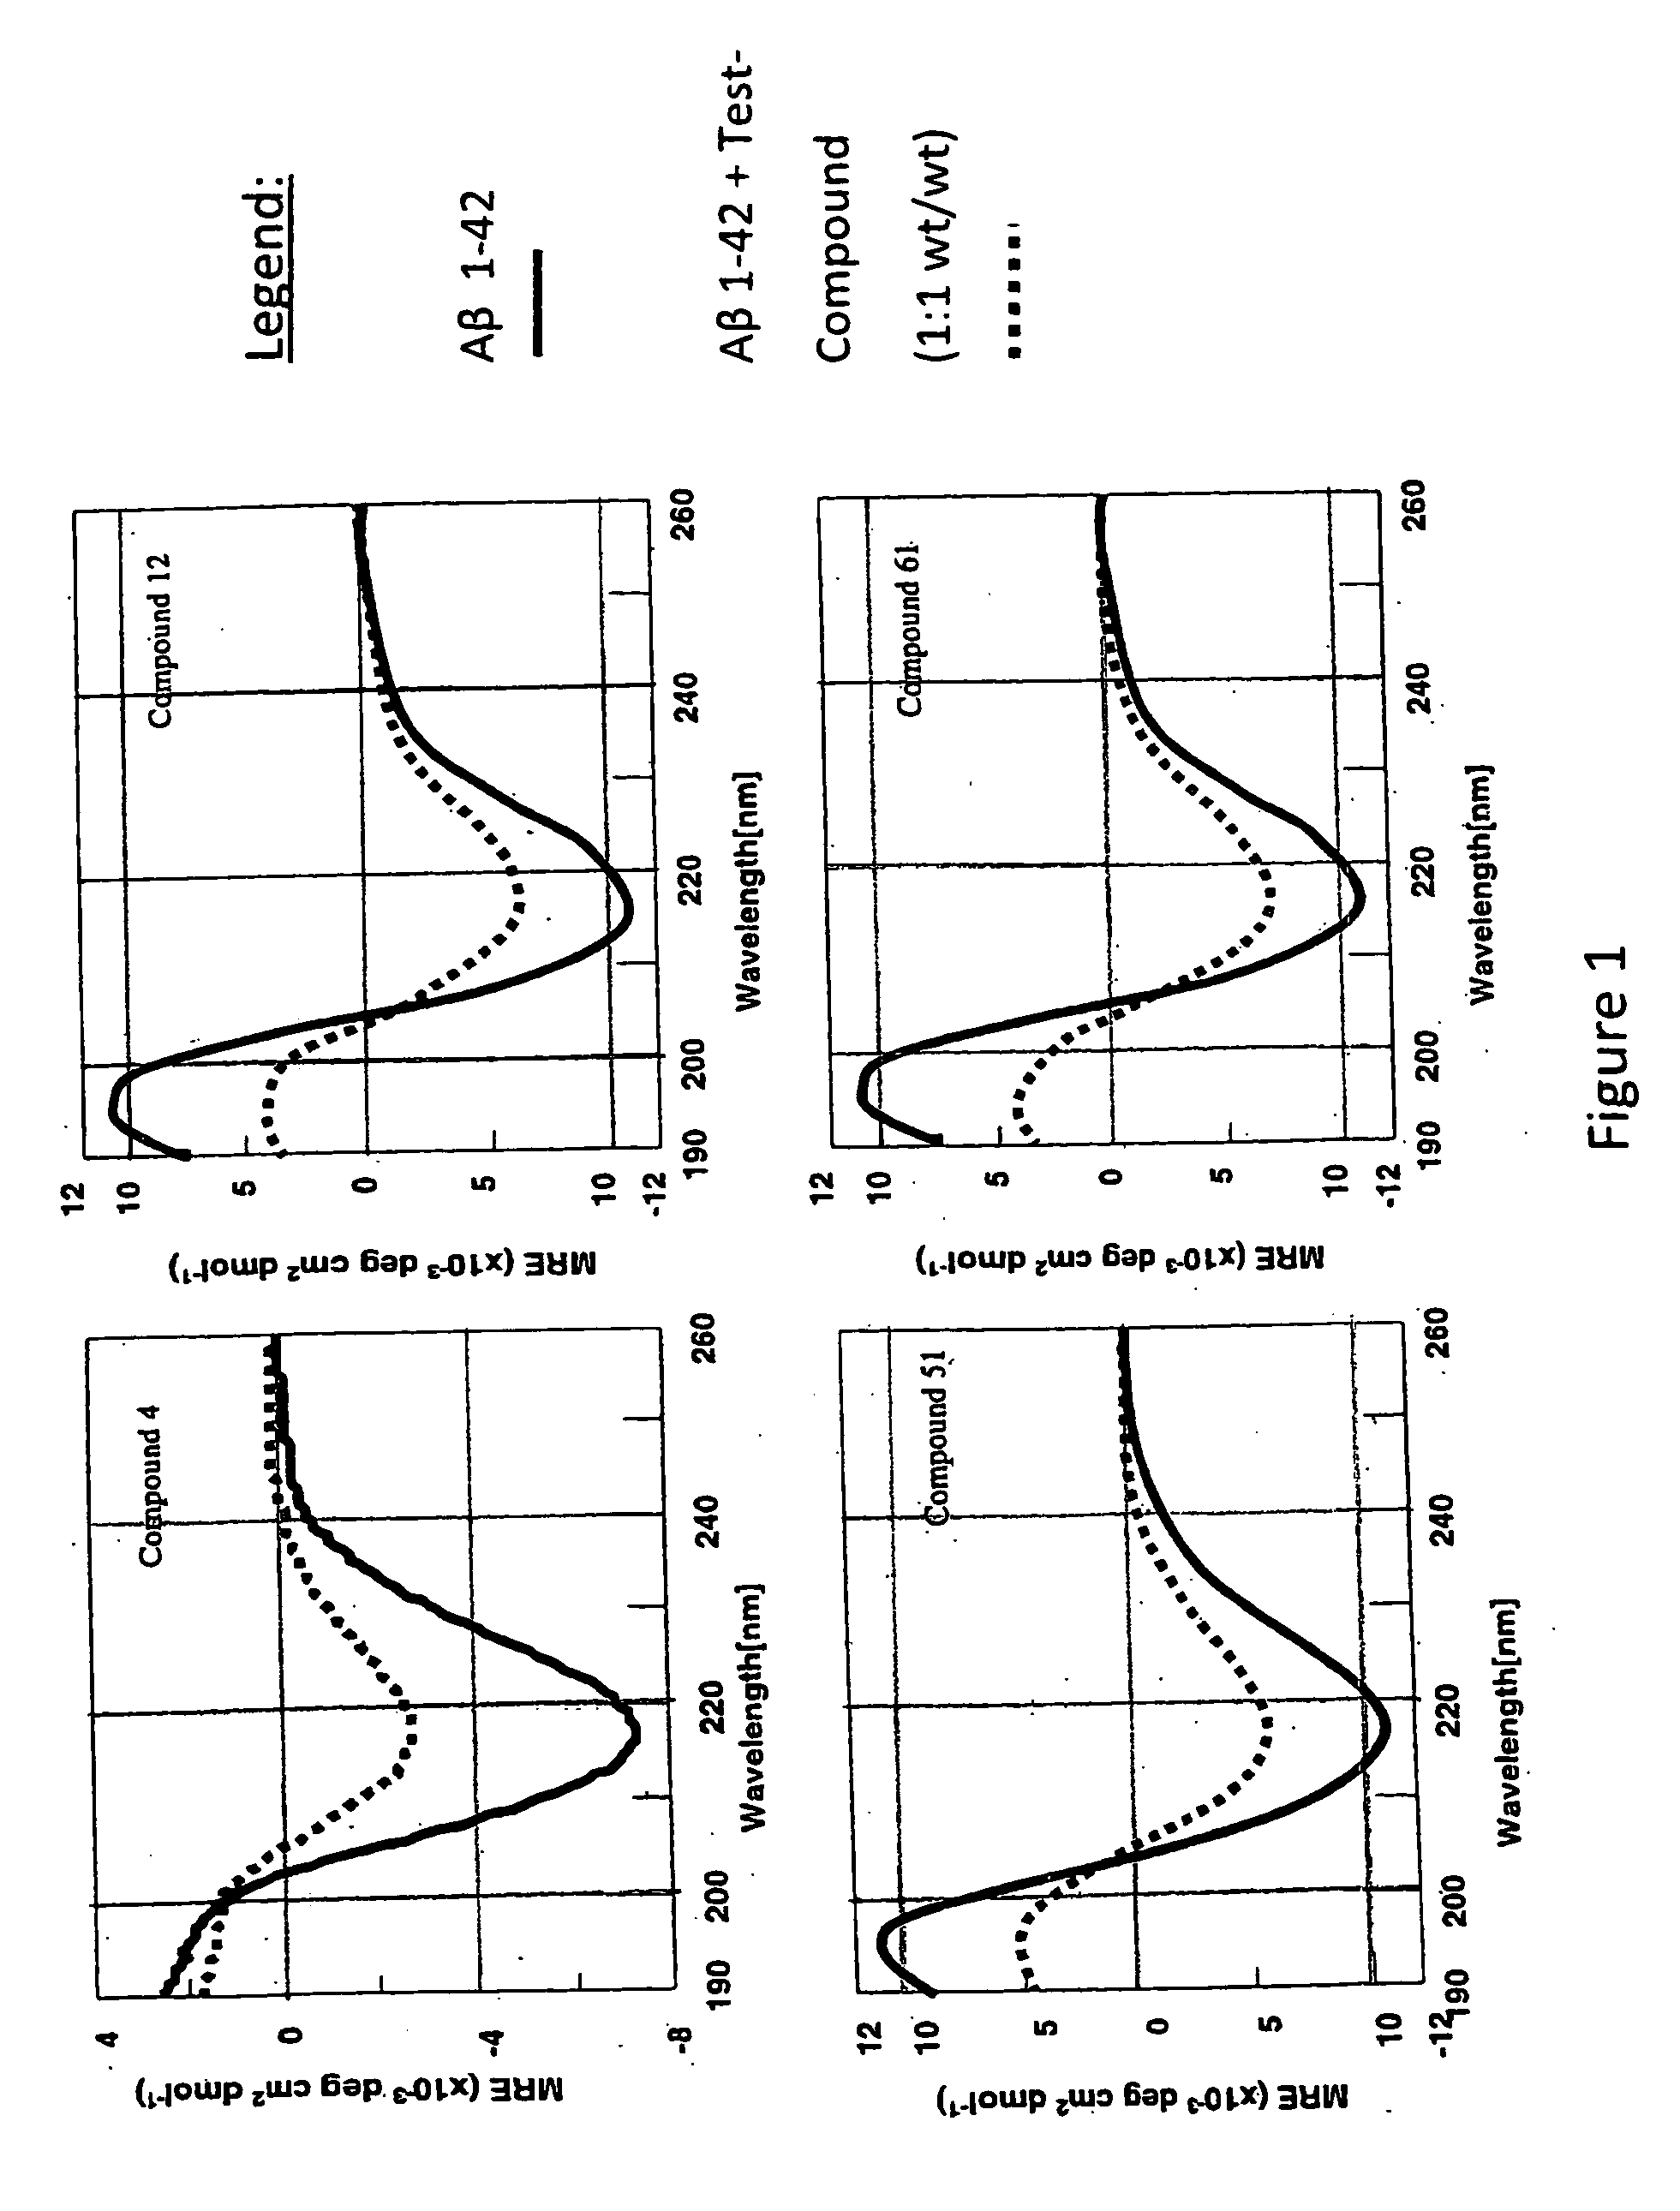 Compounds, compositions and methods for the treatment of synucleinopathies